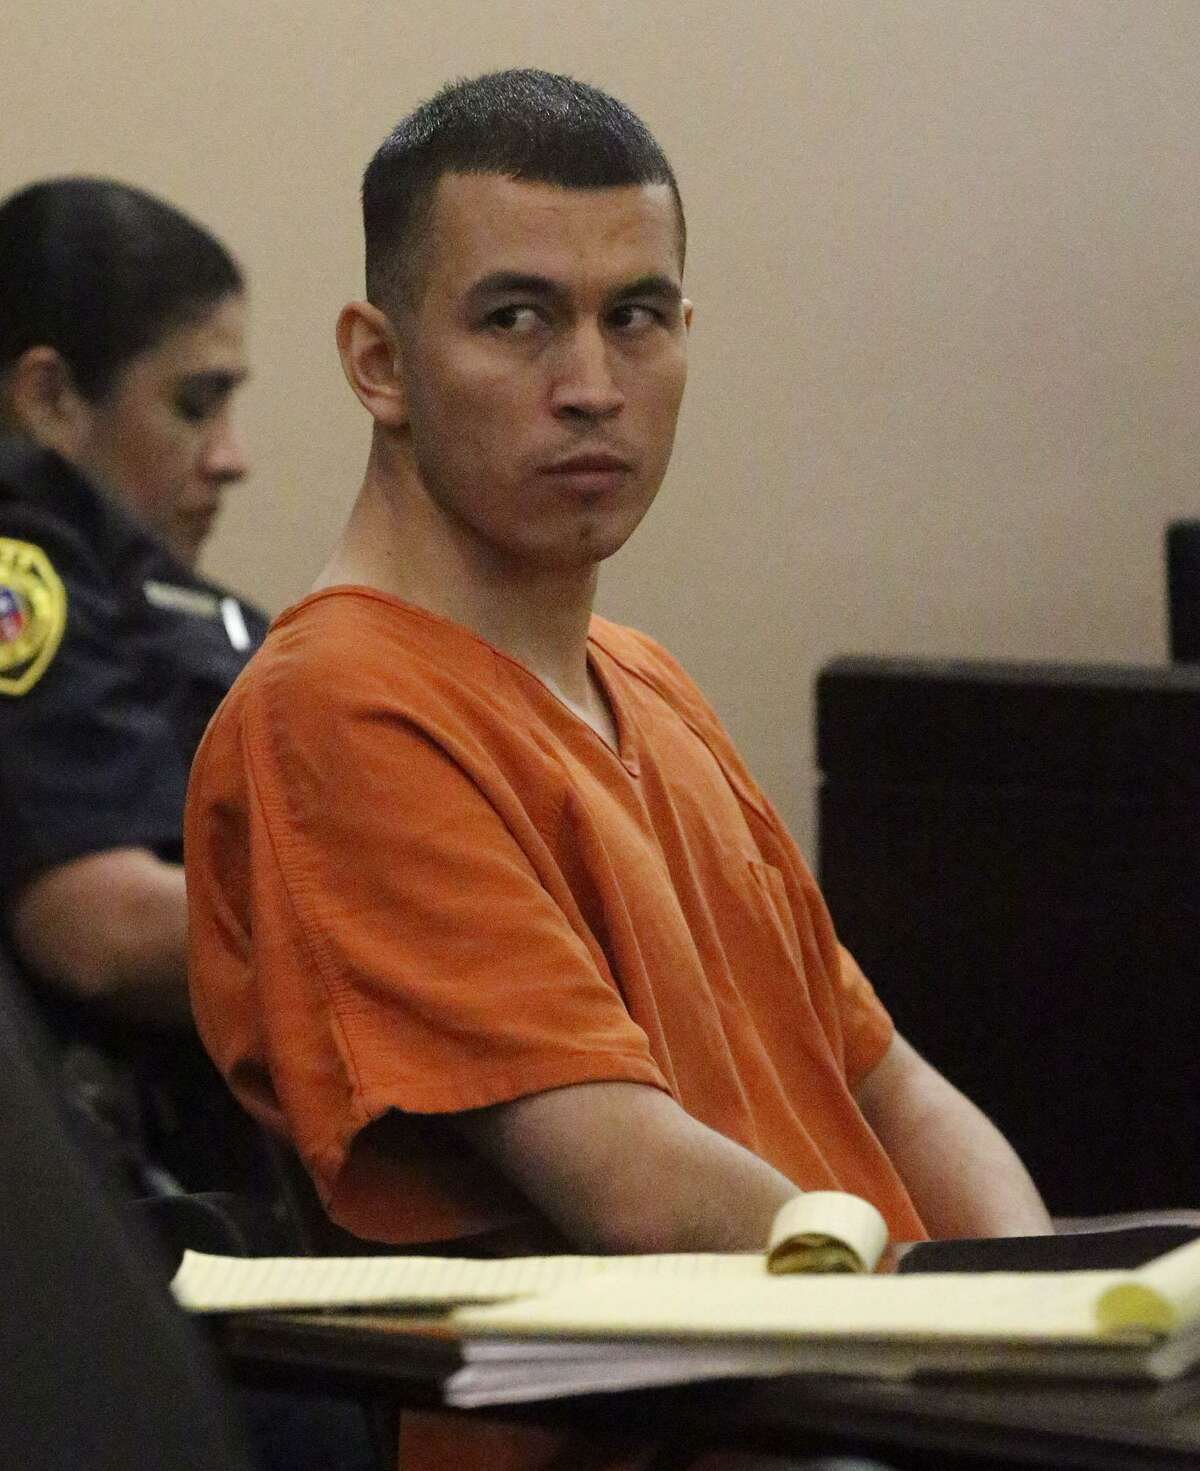 Murder defendant Miguel Martinez sits in the 437th District Court Monday April 17, 2017. A judge has declared a mistrial in Martinez's case that had been compelling enough for District Attorney Nicholas "Nico" LaHood to prosecute the case himself. Martinez has been accused of killing Laura Cater in 2015.